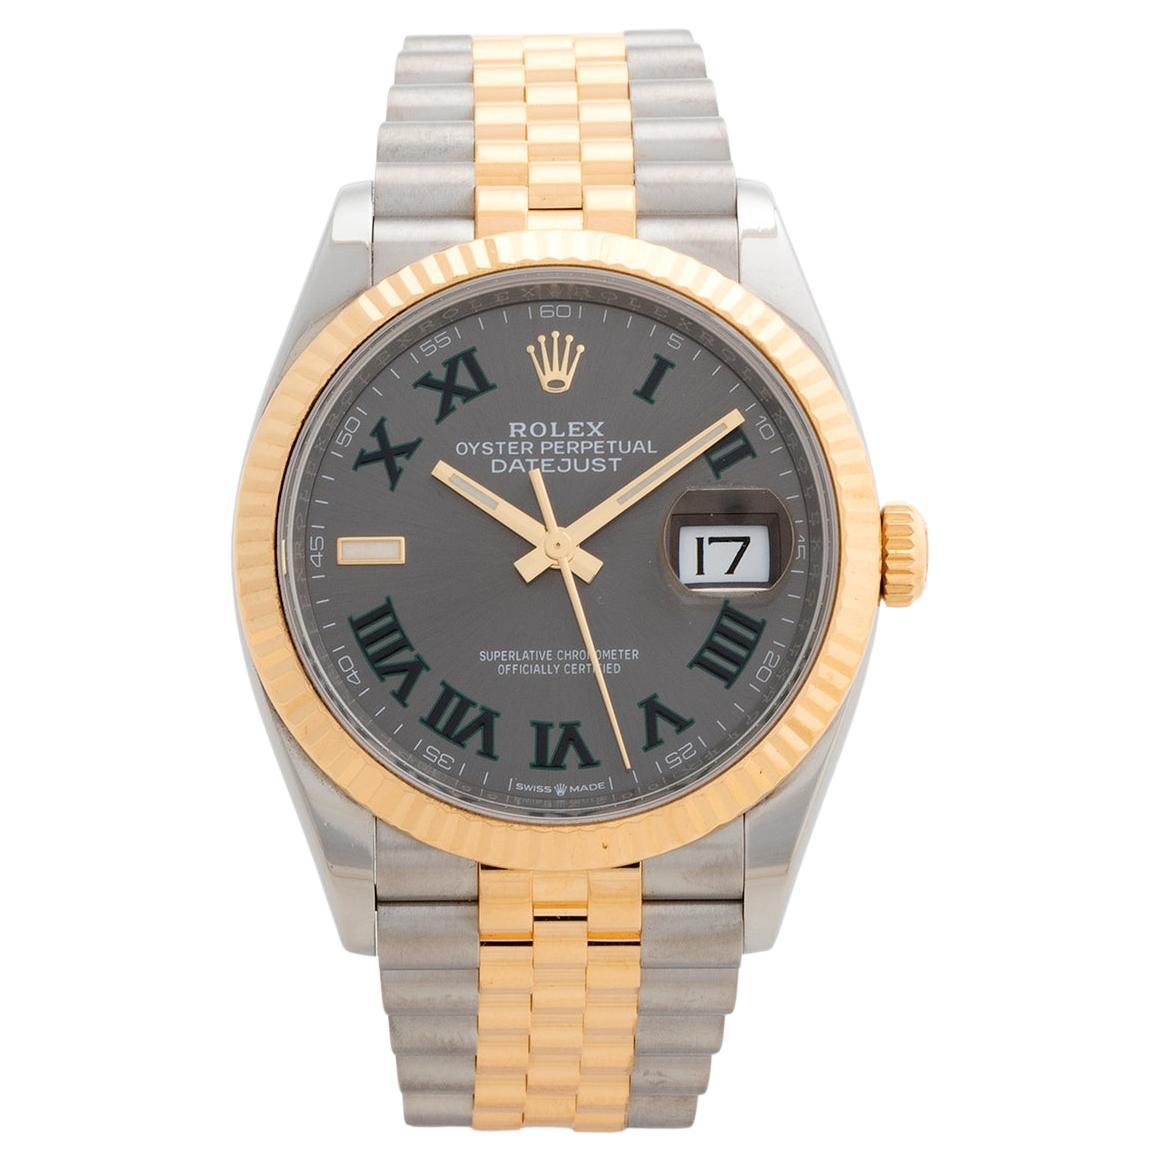 Our Rolex Datejust reference 126233 features a stainless steel and 18k yellow gold 36mm case with stainless steel and 18k yellow gold jubilee bracelet. This example has the 